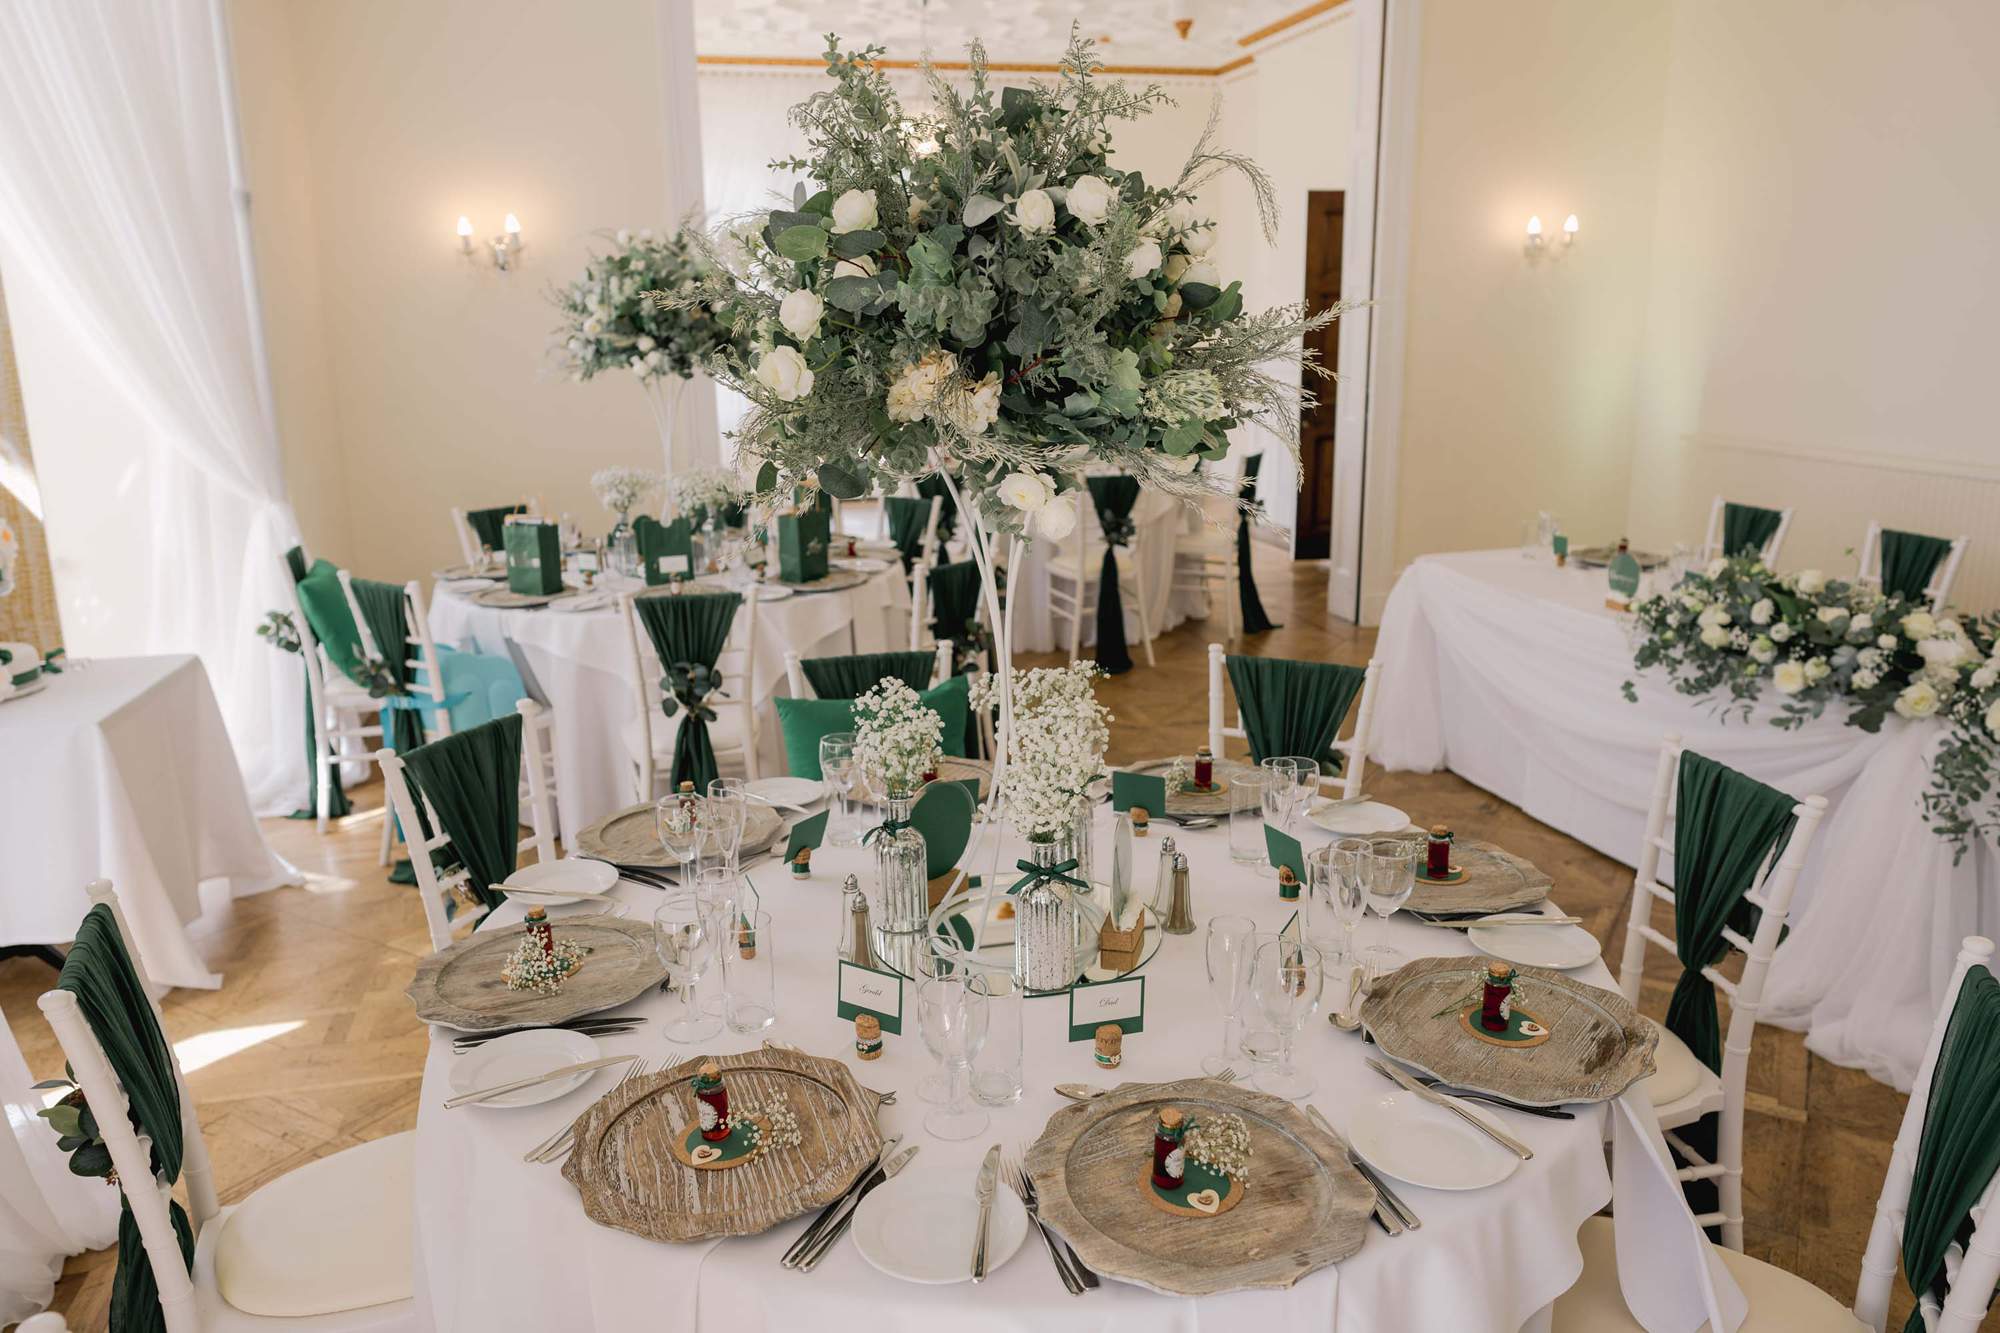 White flowers and details at Highley Manor wedding venue in Sussex.